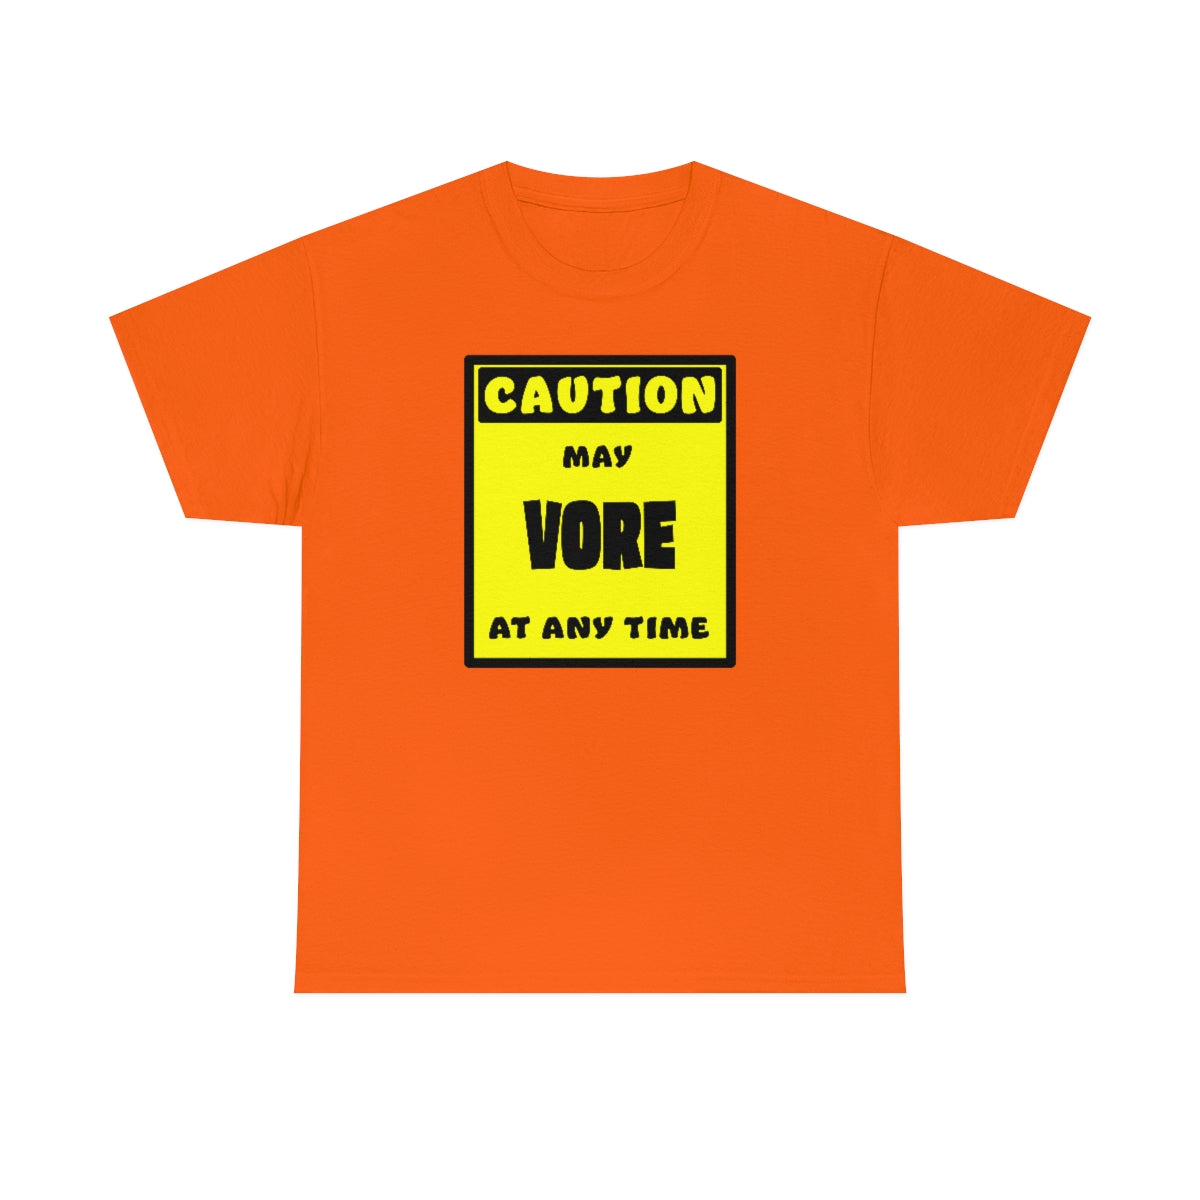 CAUTION! May VORE at any time! - T-Shirt T-Shirt AFLT-Whootorca Orange S 